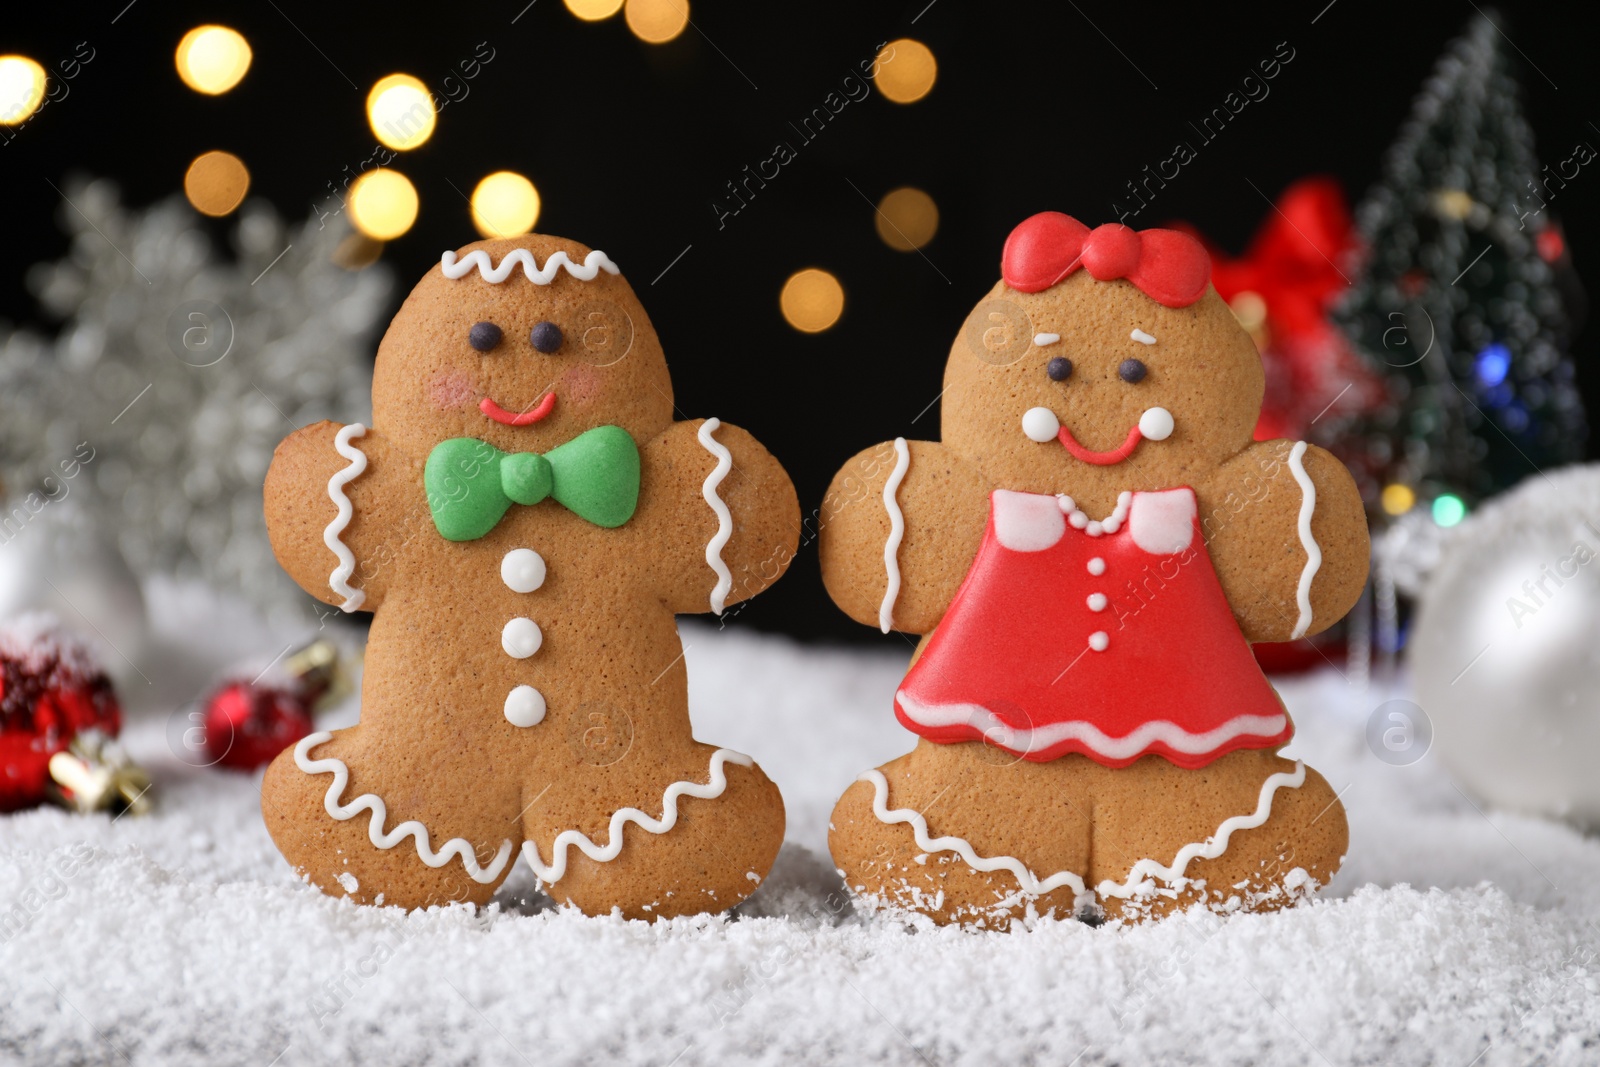 Photo of Gingerbread people on snow against festive lights, closeup